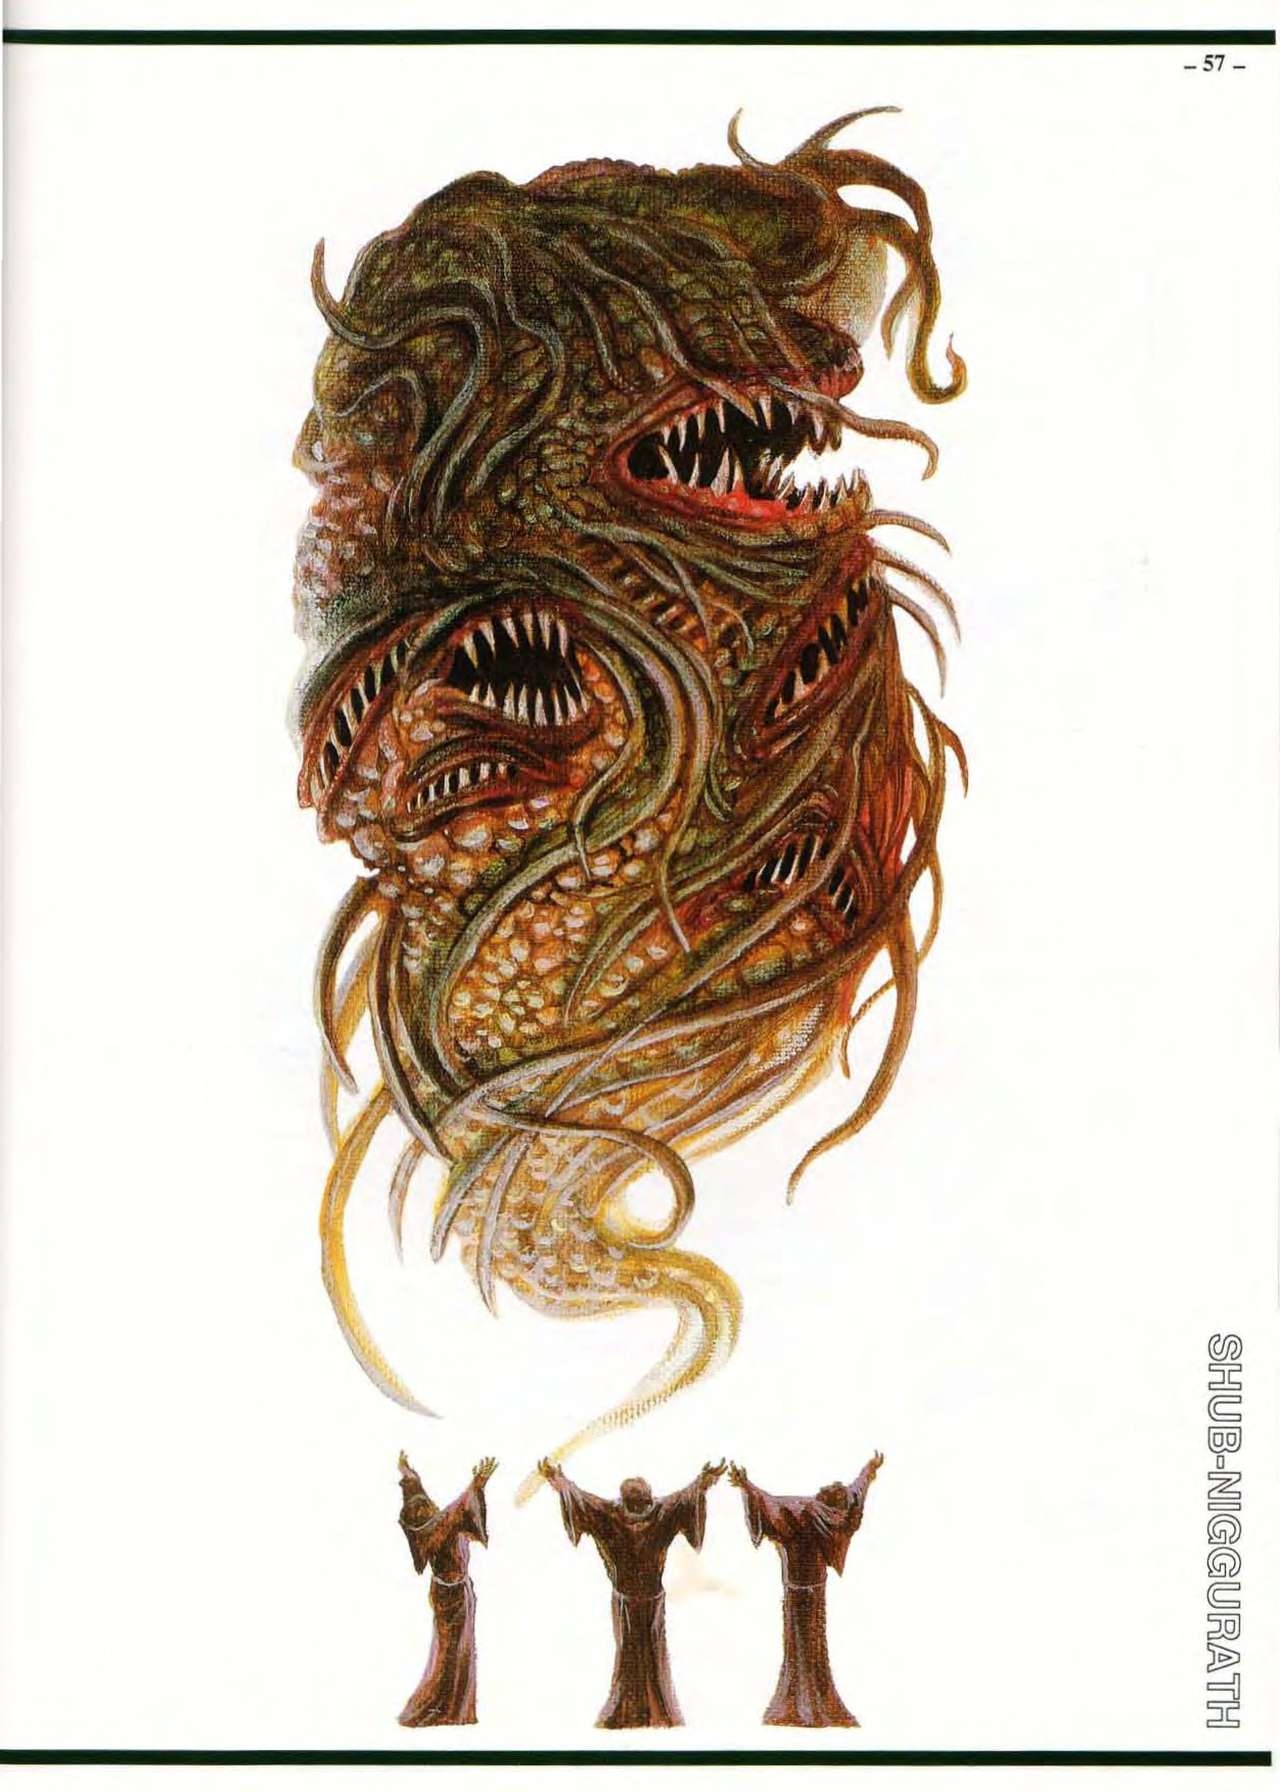 S. Petersen's Field Guide to Cthulhu Monsters 56